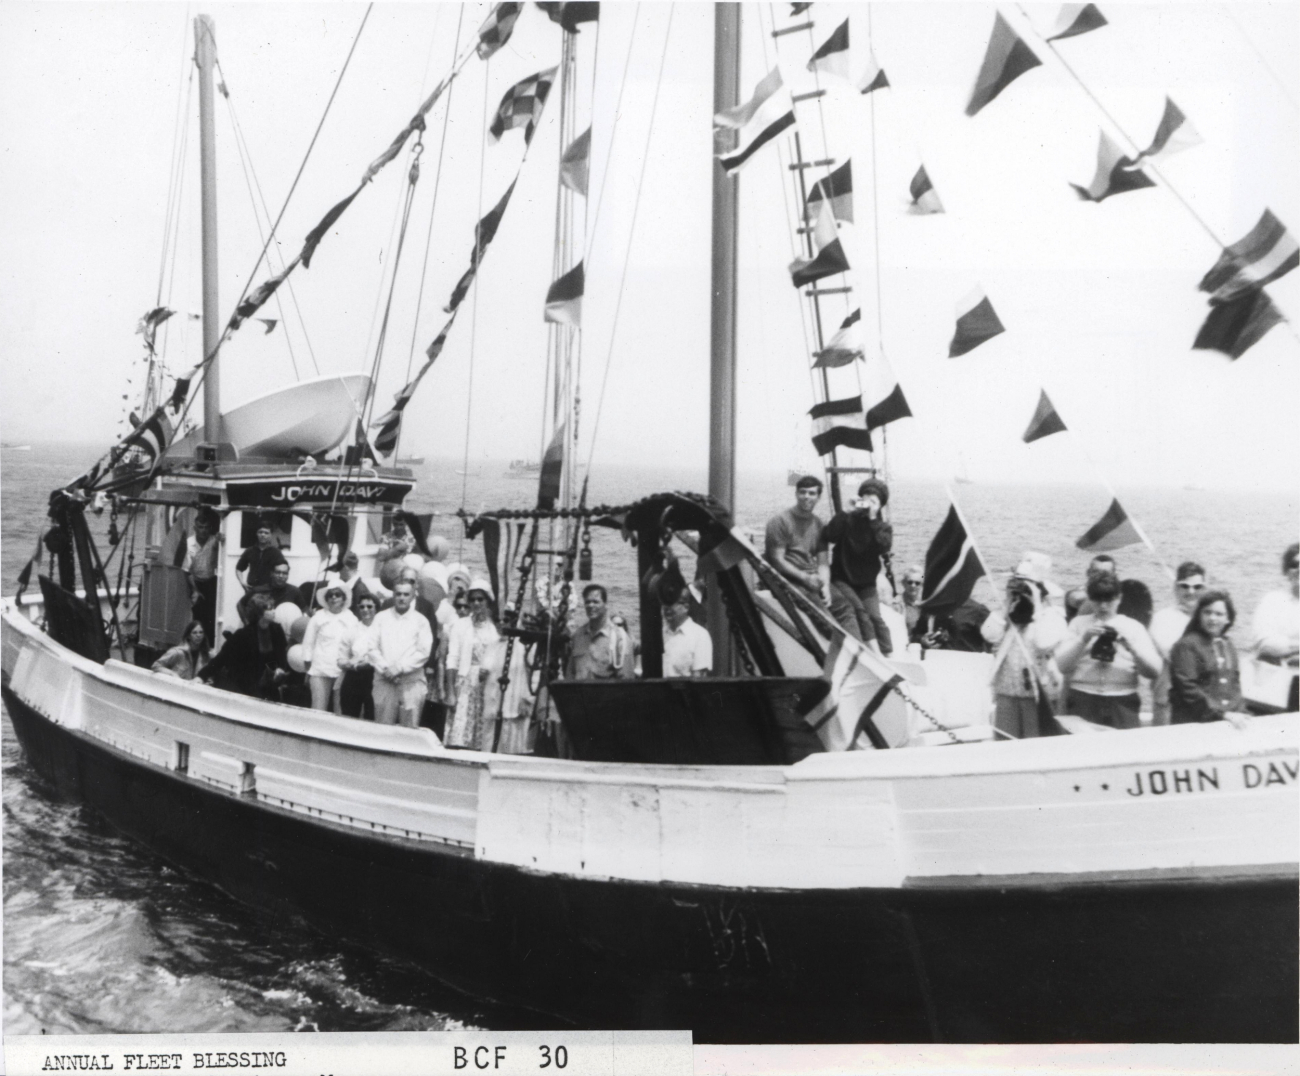 The fishing vessel JOHN DAY with family and crew members aboard duringAnnual Blessing of the Fleet